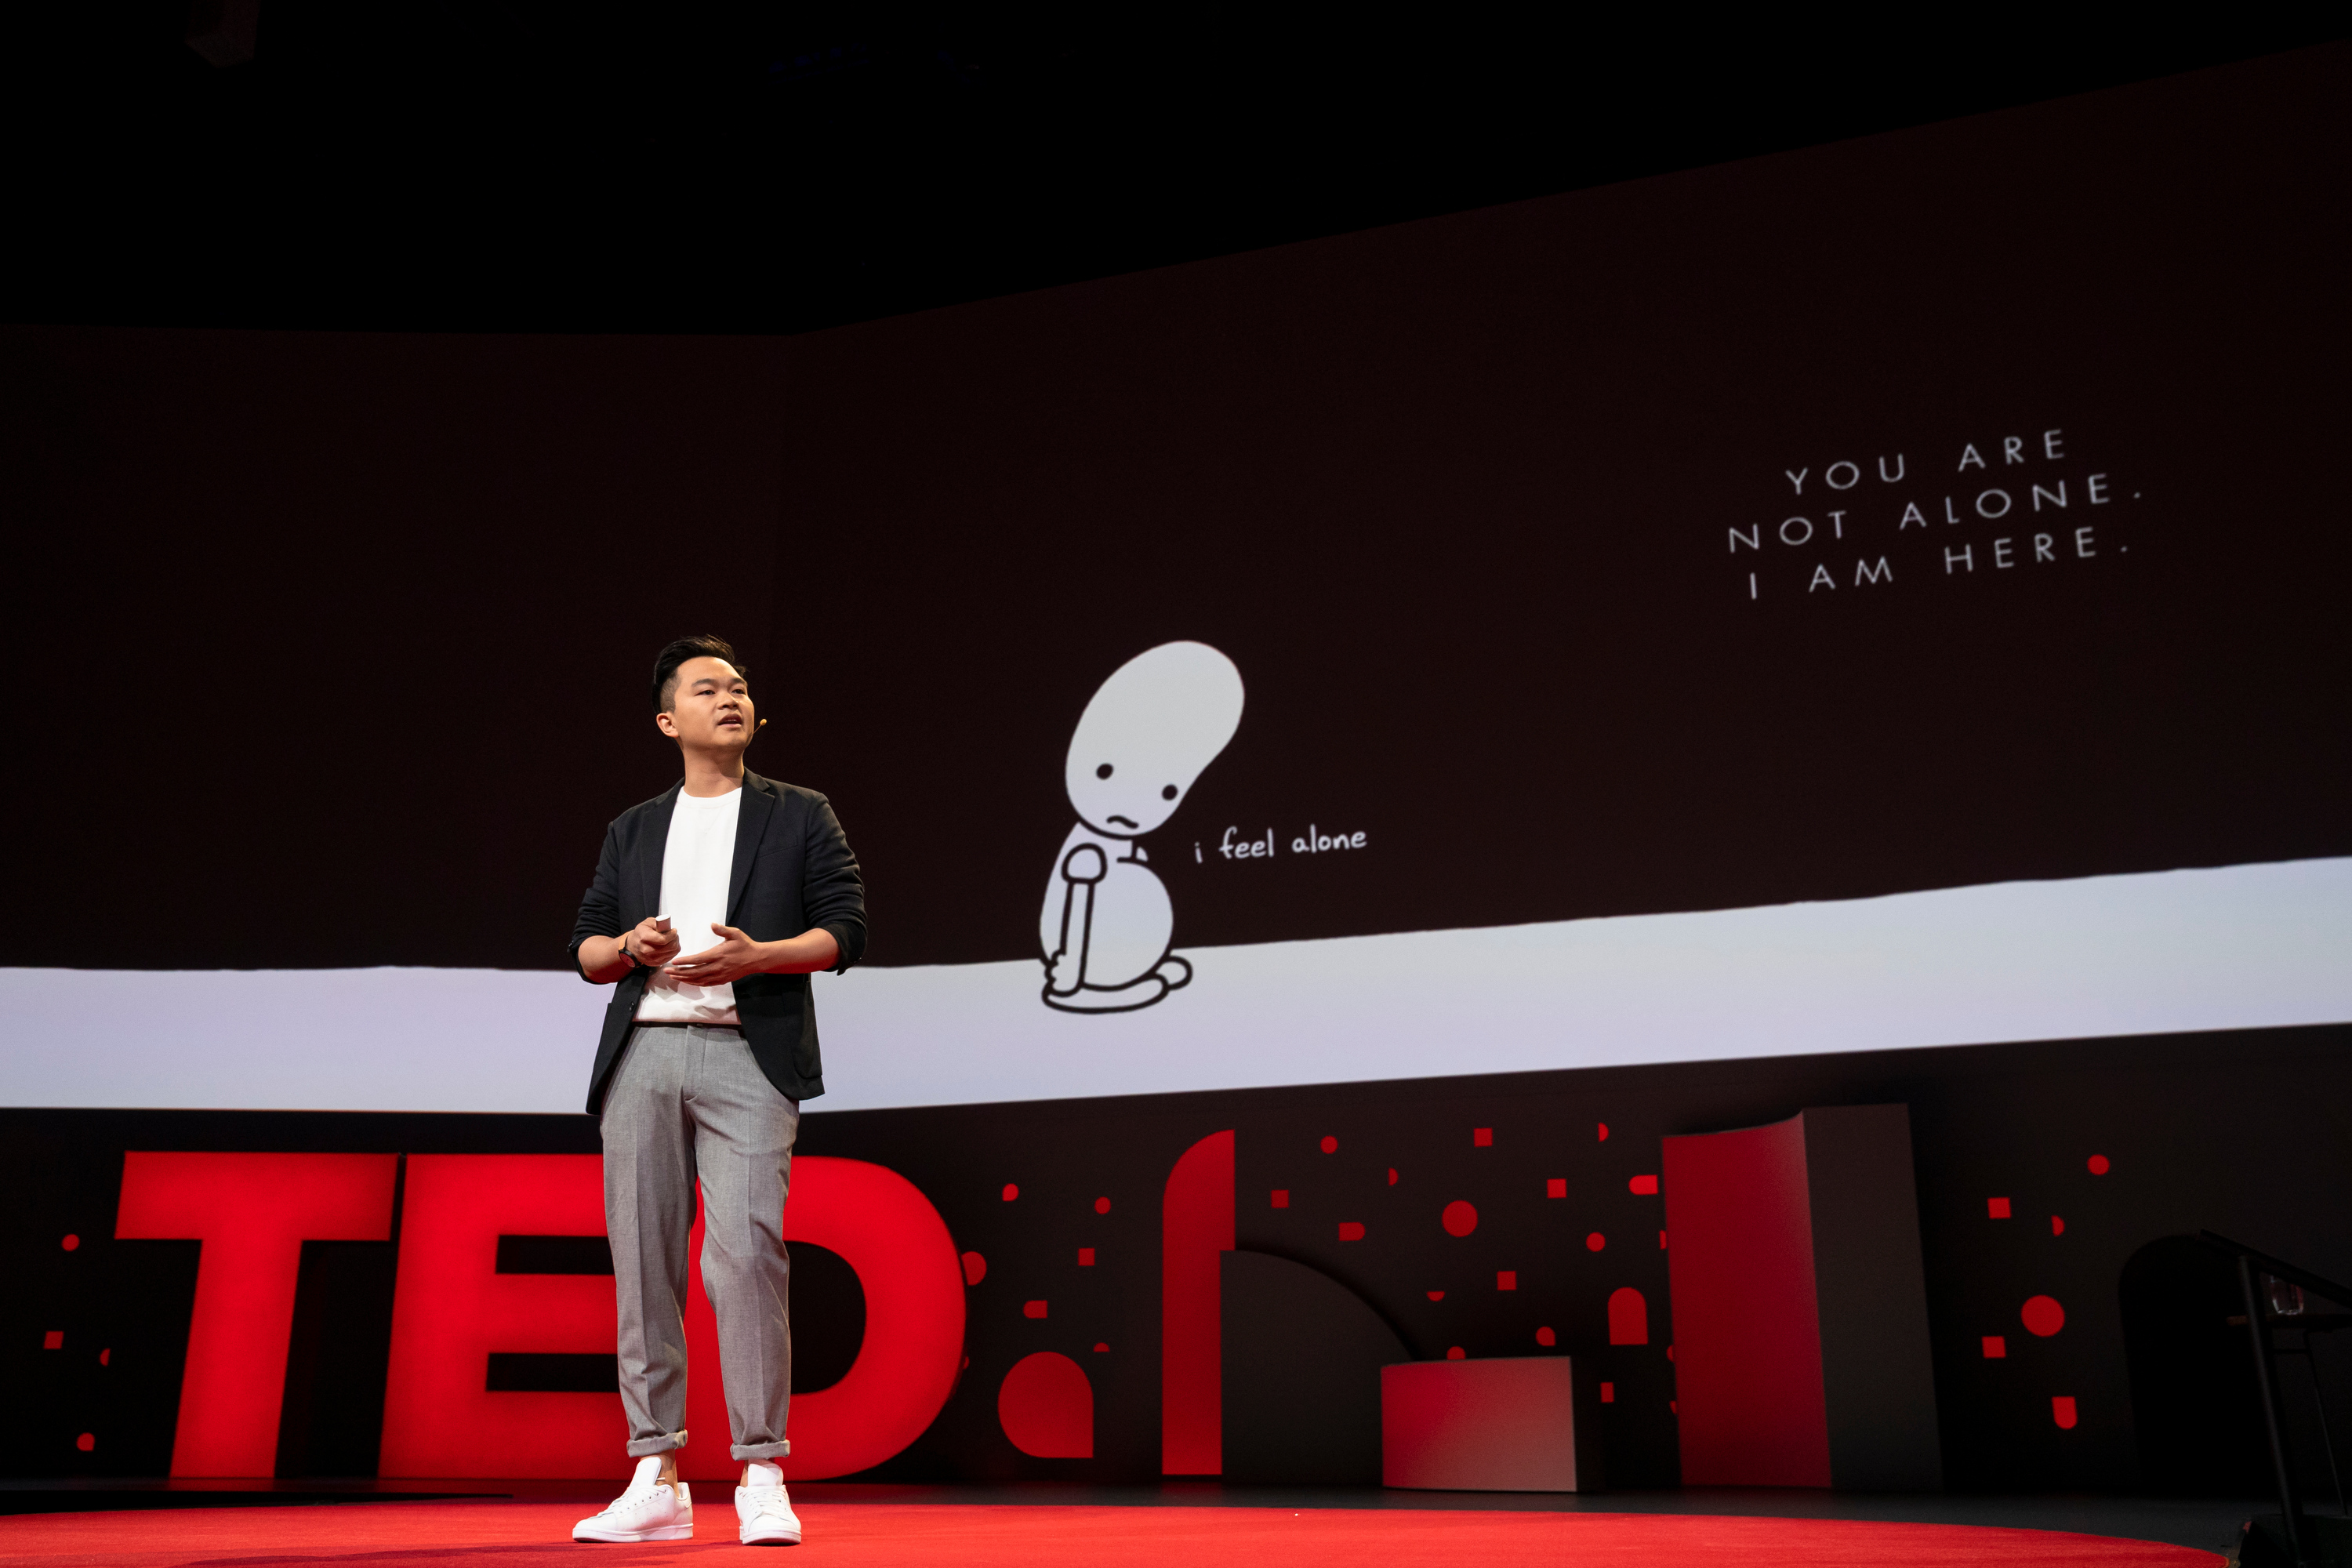 Jonny Sun: Making the internet a bit less lonely | TED Blog